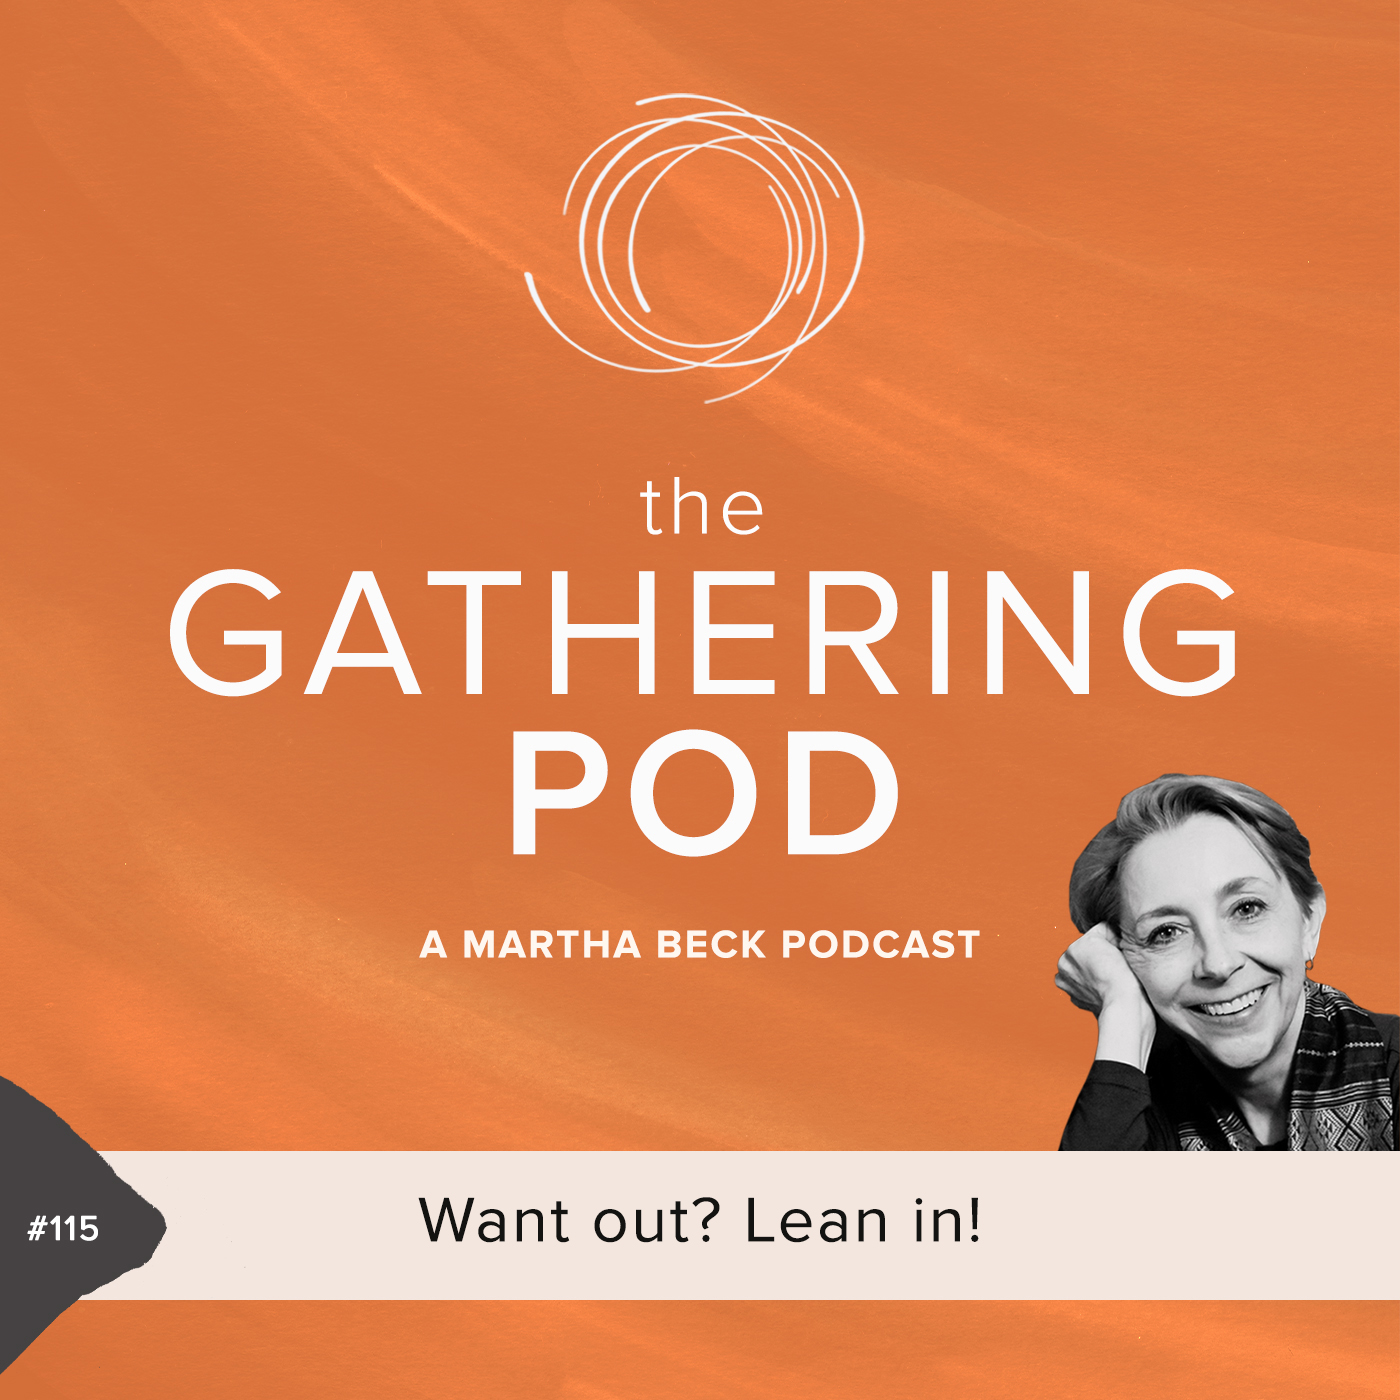 Image for The Gathering Pod A Martha Beck Podcast Episode #115 Want out? Lean in!